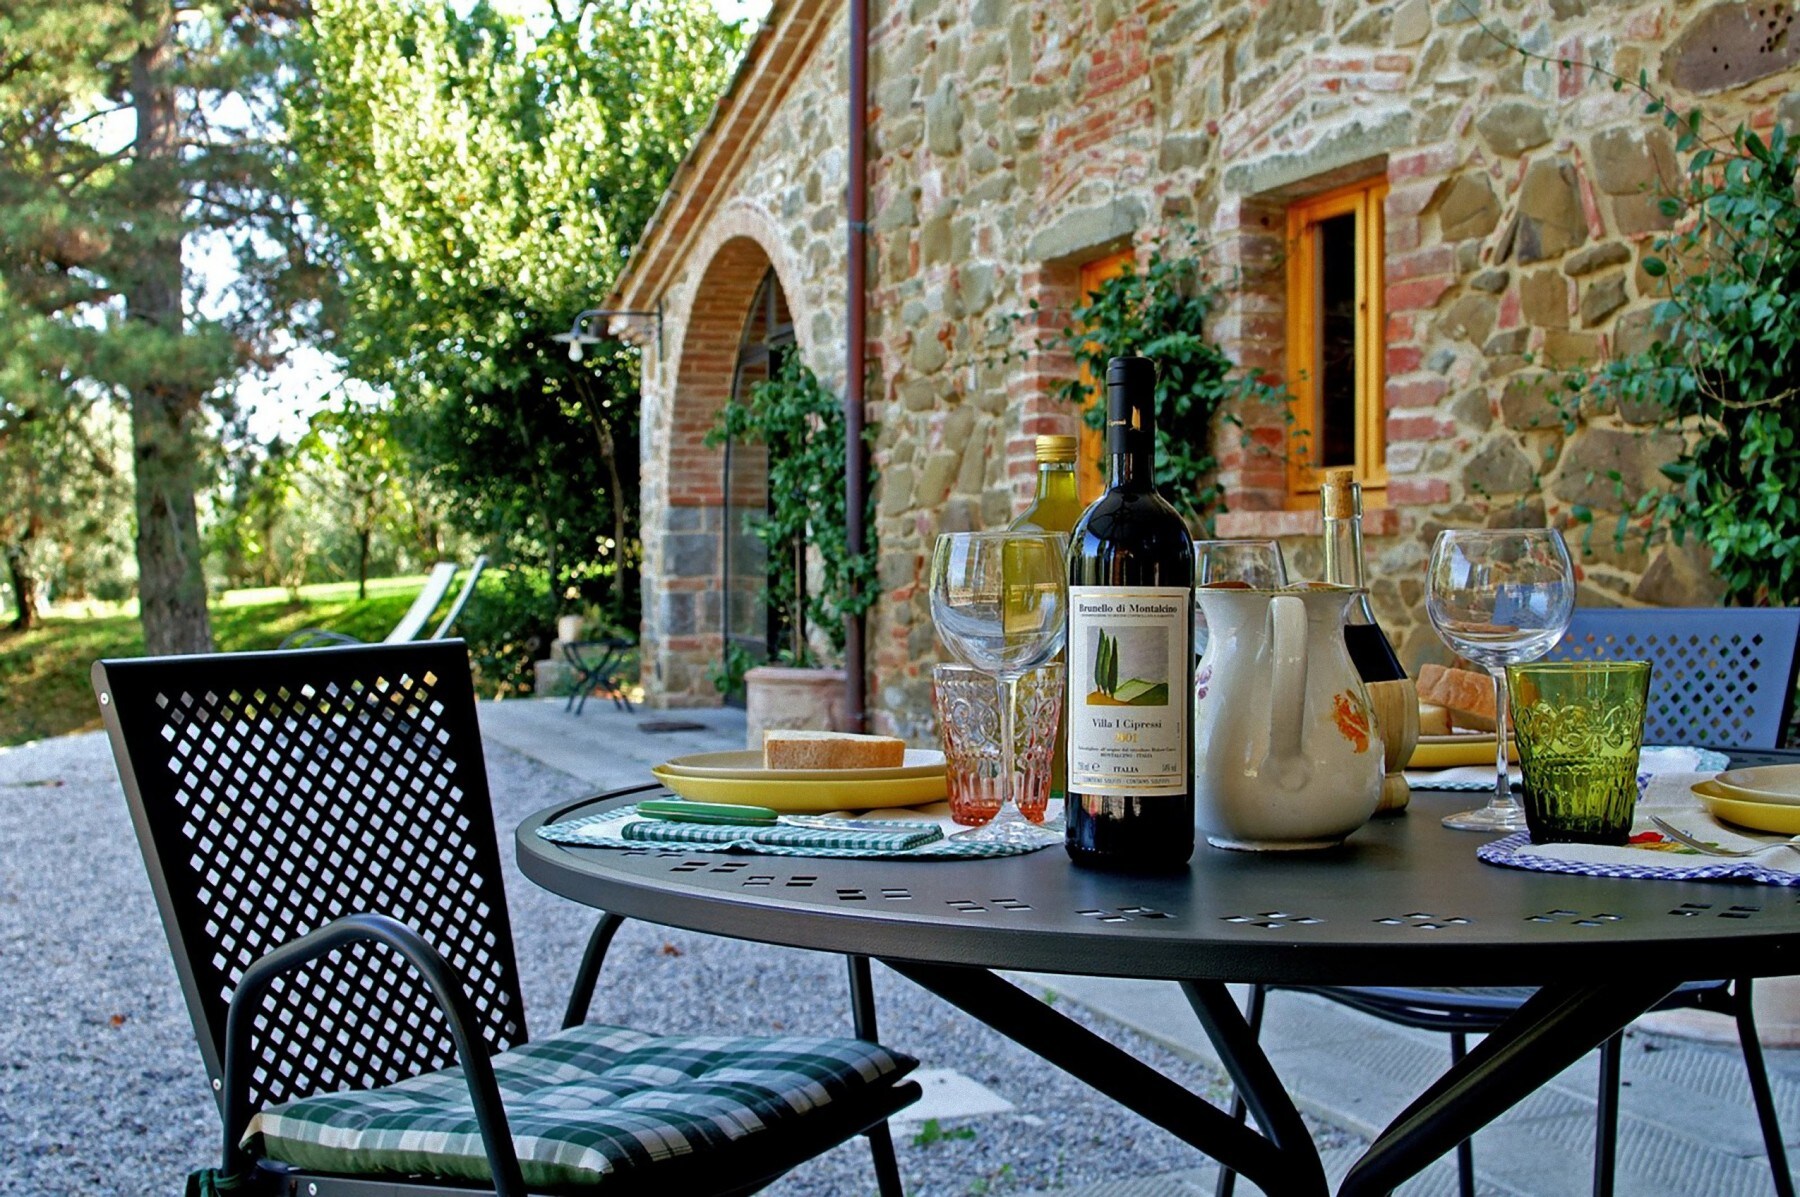 Property Image 2 - Pleasant Cozy Villa in Tuscany with Nice Garden and BBQ